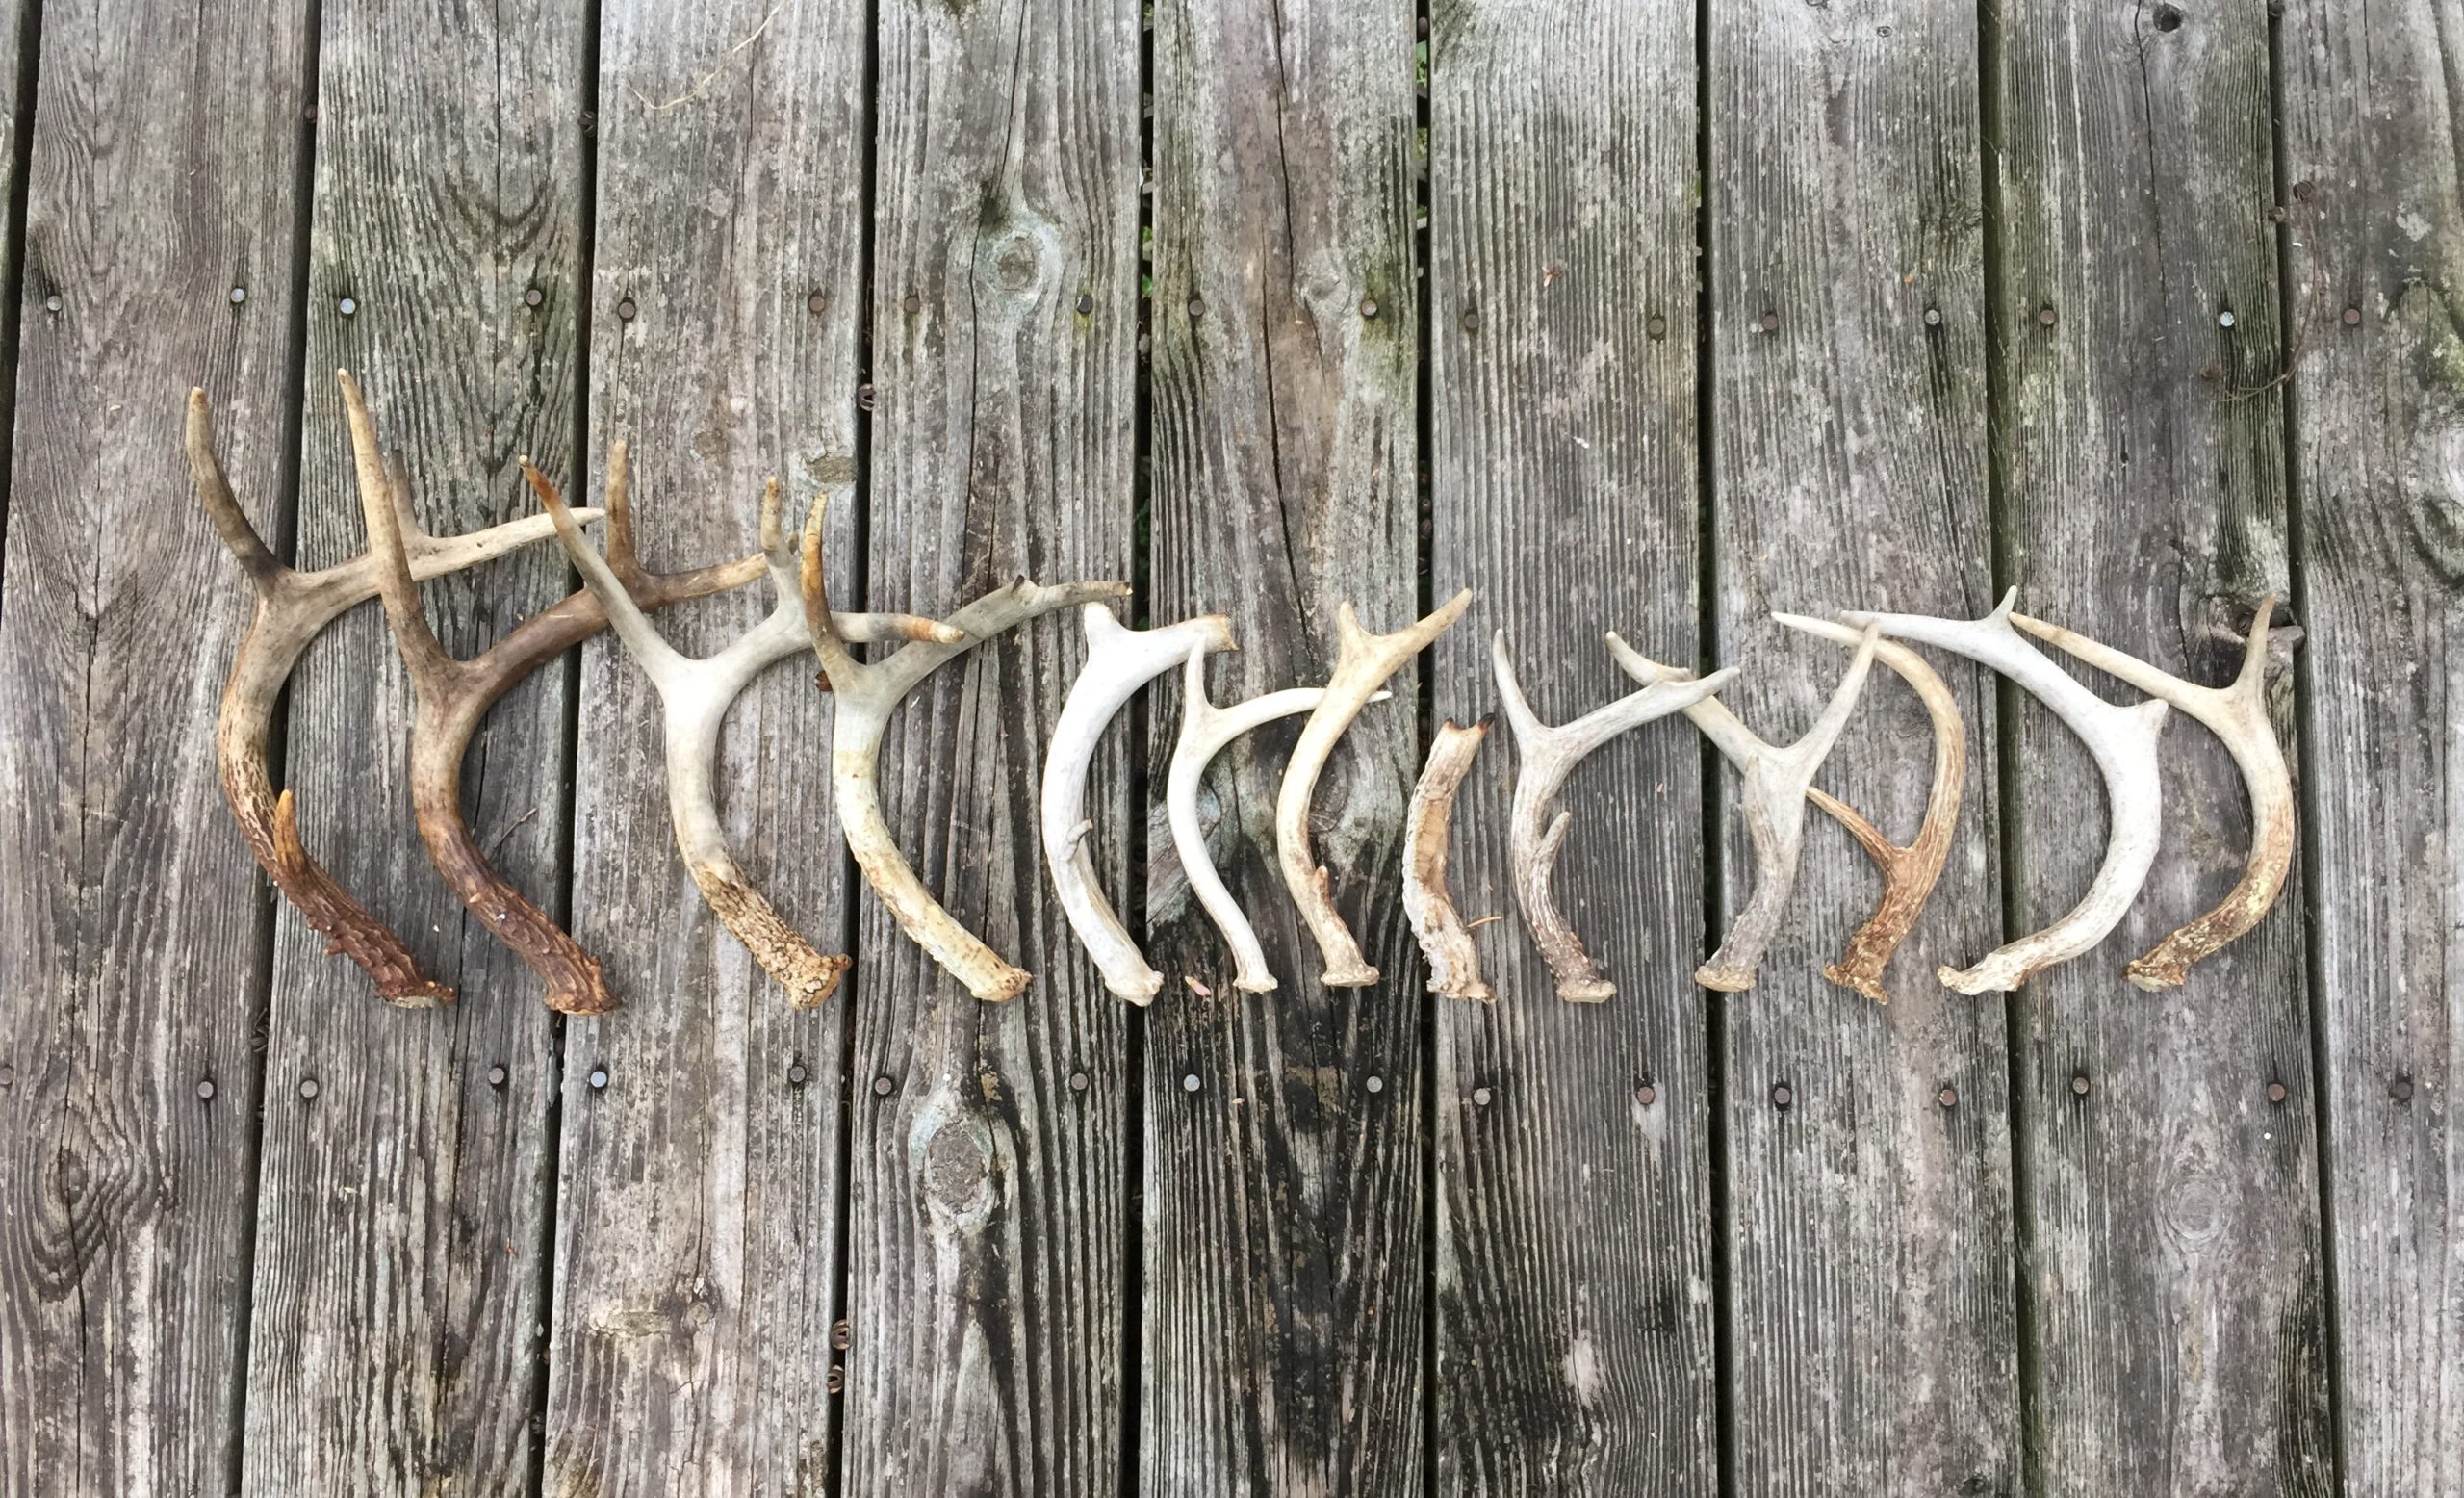 The Southerner's Guide to Shed Hunting – Garden & Gun